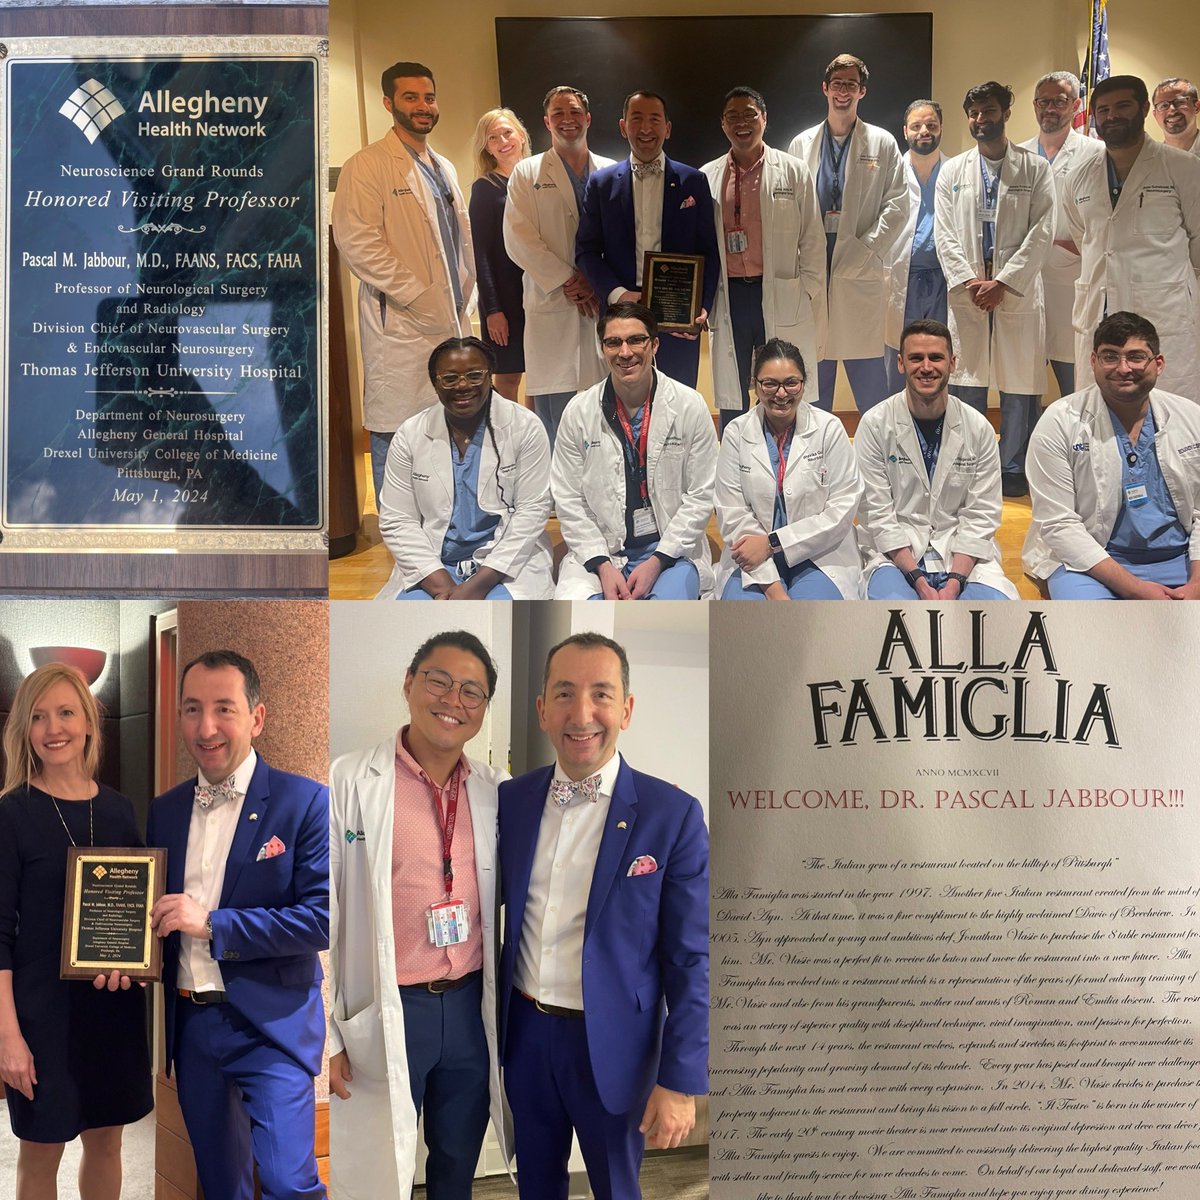 It was such a pleasure to be invited as a visiting Professor at Allegheny General Hospital Department of Neurosurgery! What a fantastic team of residents and faculty ! I enjoyed the Scientific/Social/Career exchanges with an energetic group of hardworking residents!